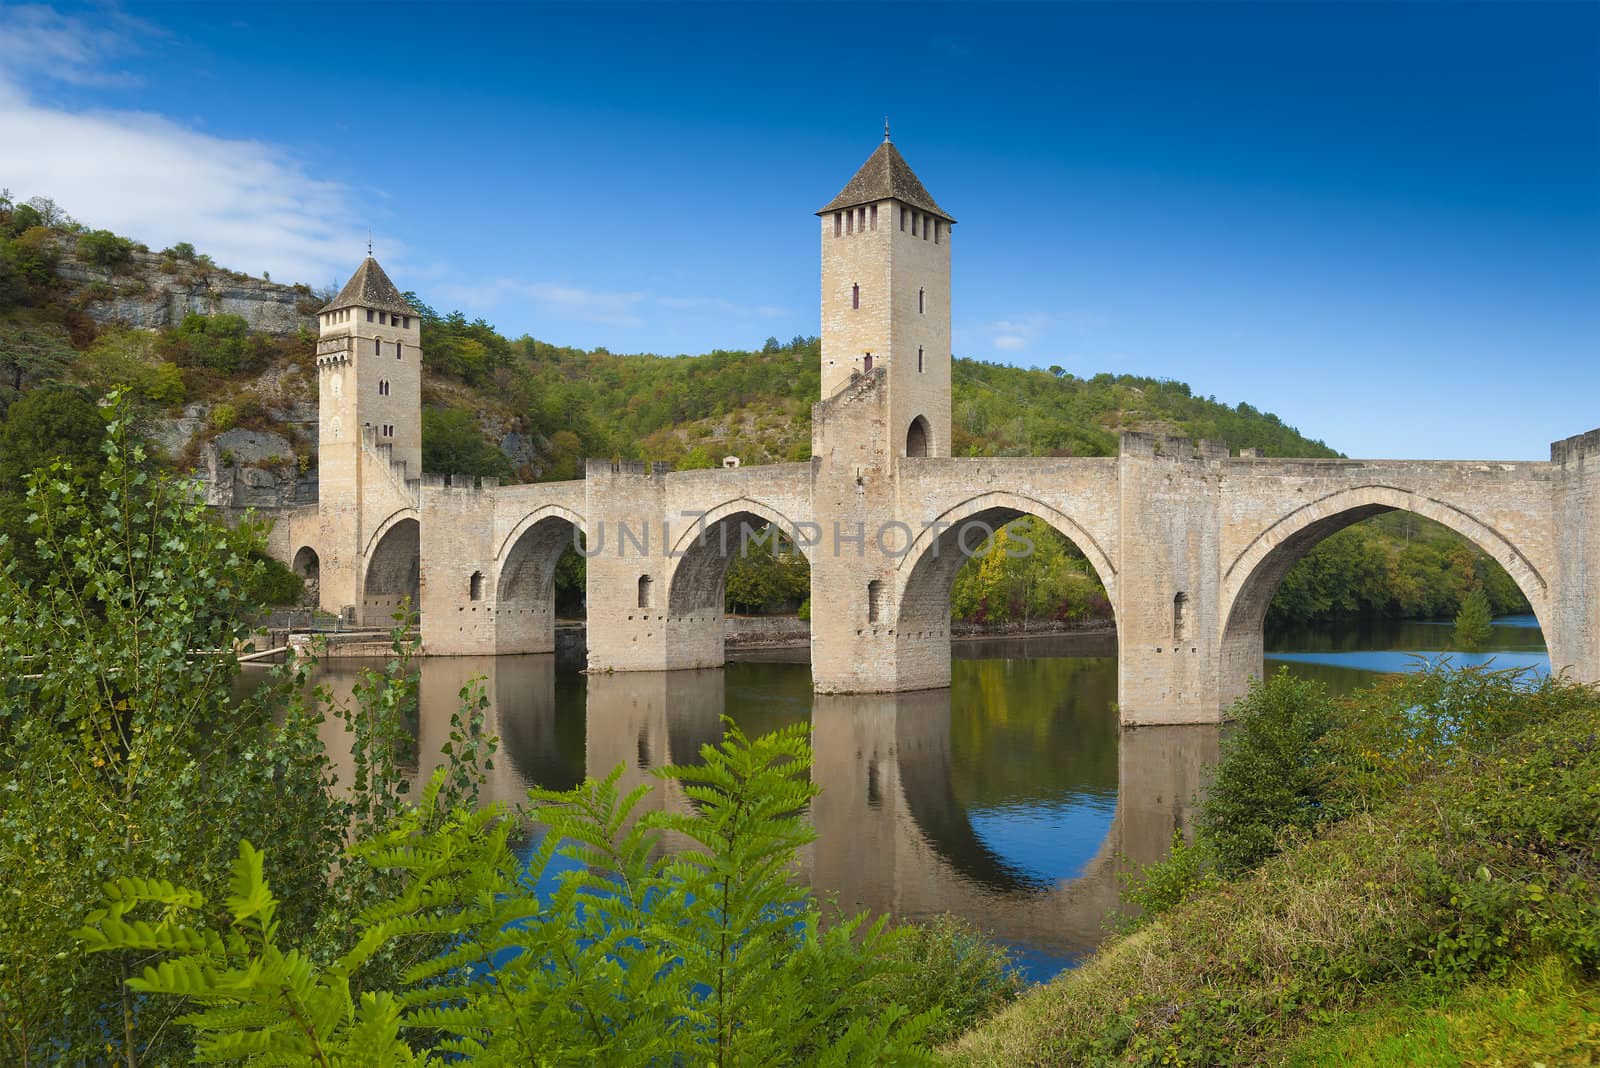 Valantre bridge in Cahors, France by f/2sumicron